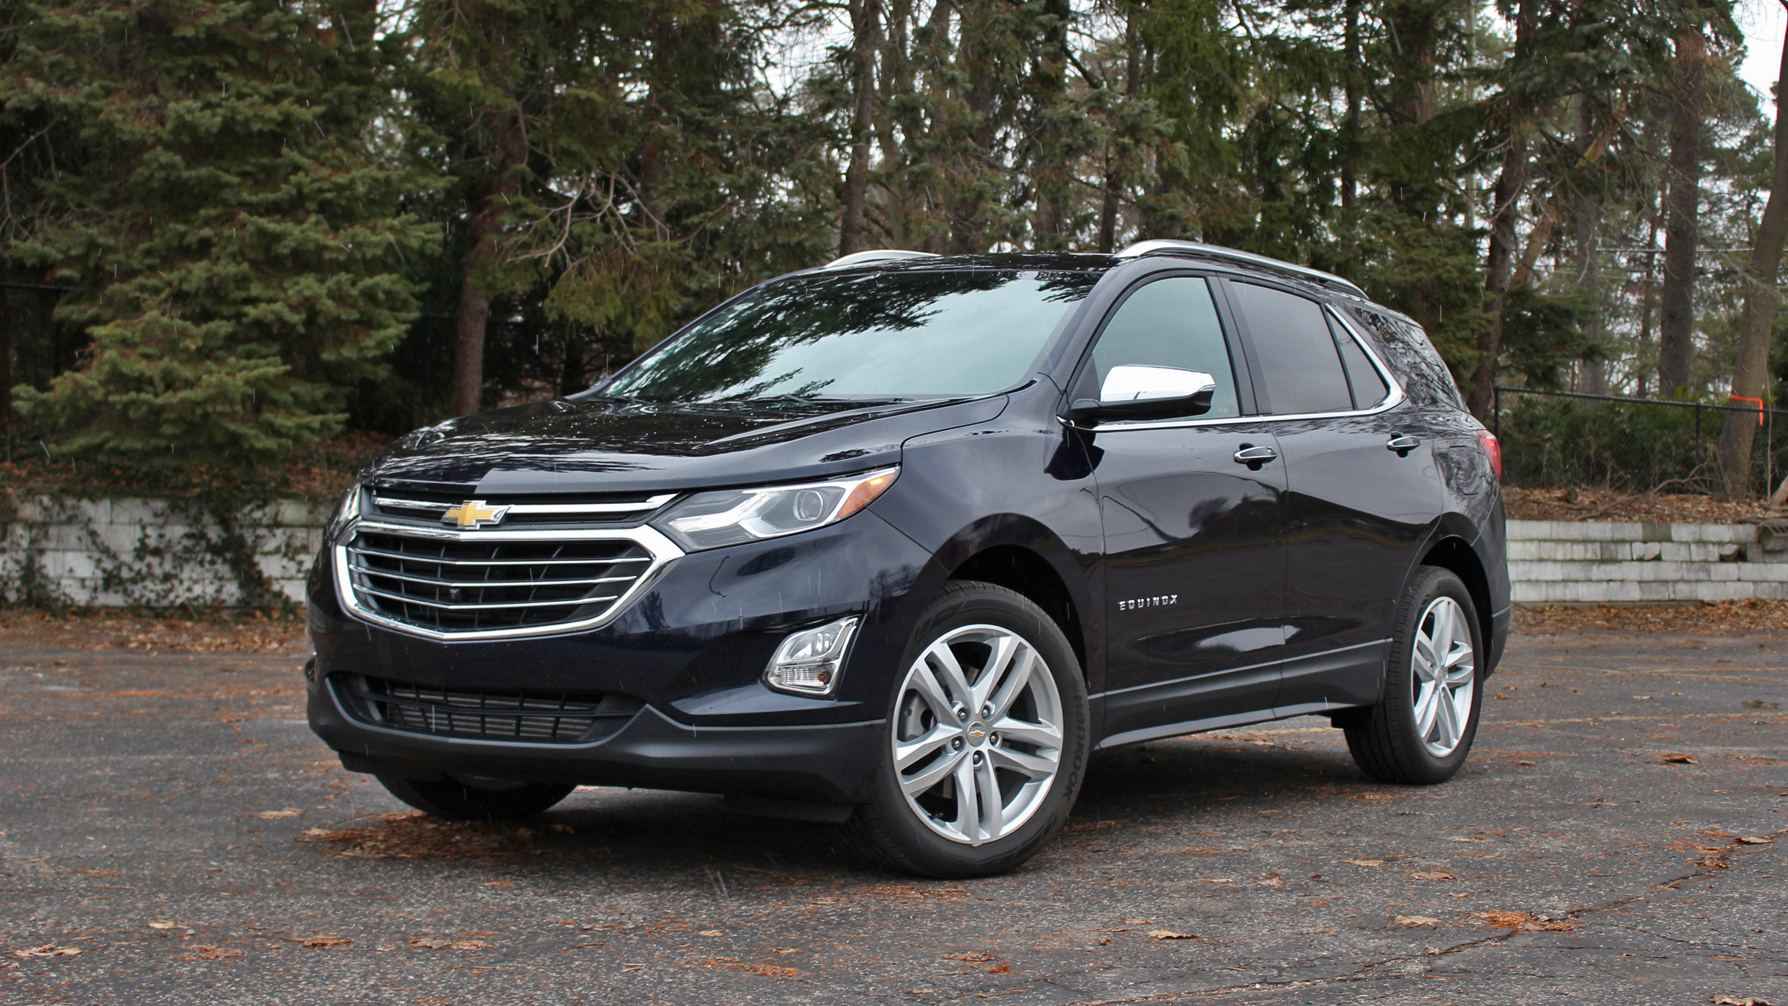 2020-chevrolet-equinox-review-price-specs-features-and-photos